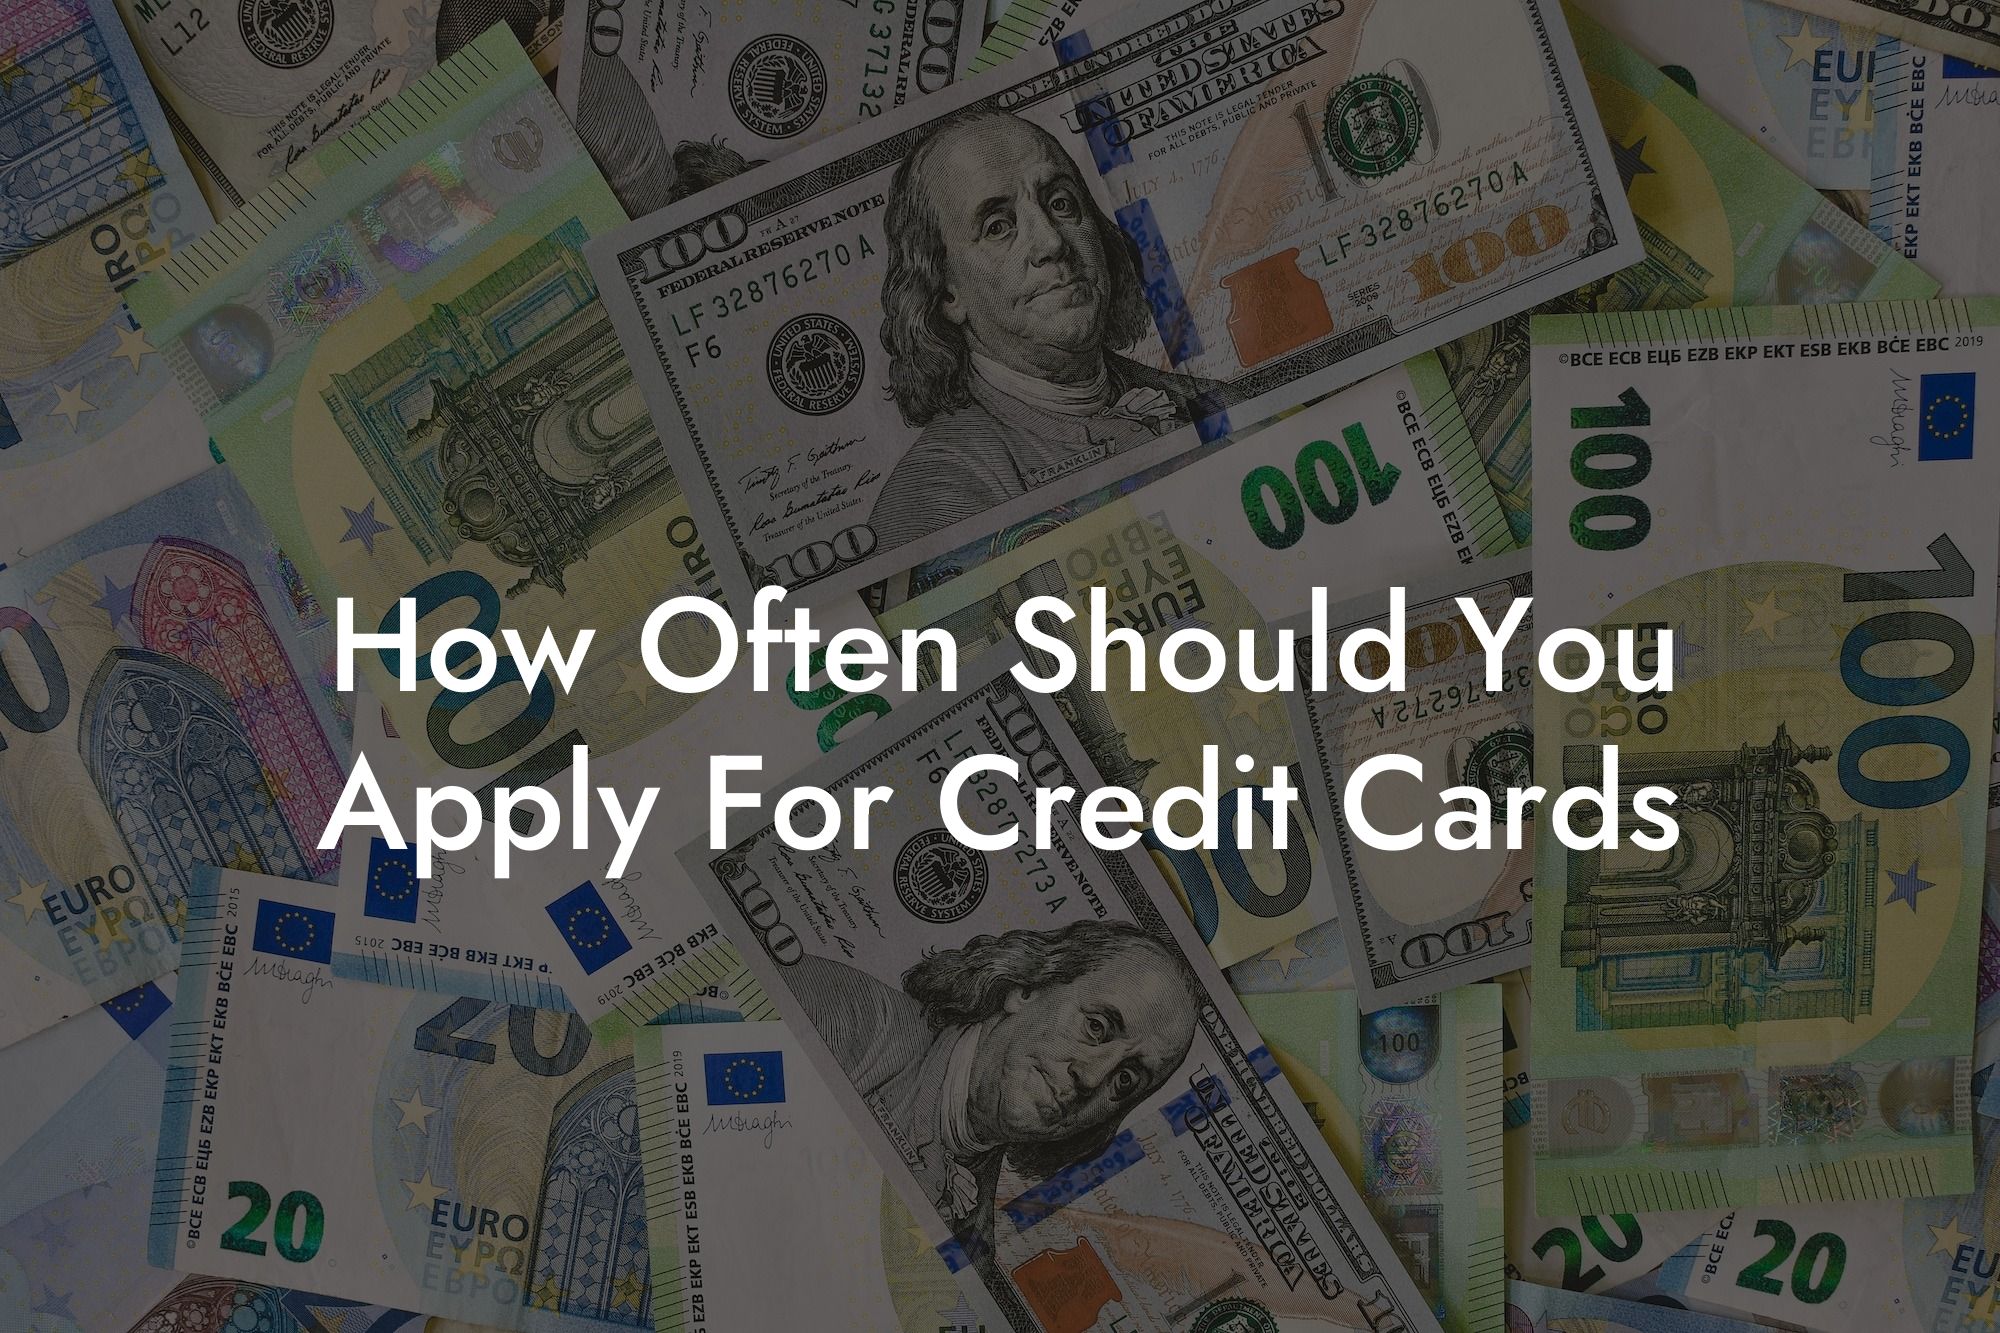 How Often Should You Apply For Credit Cards